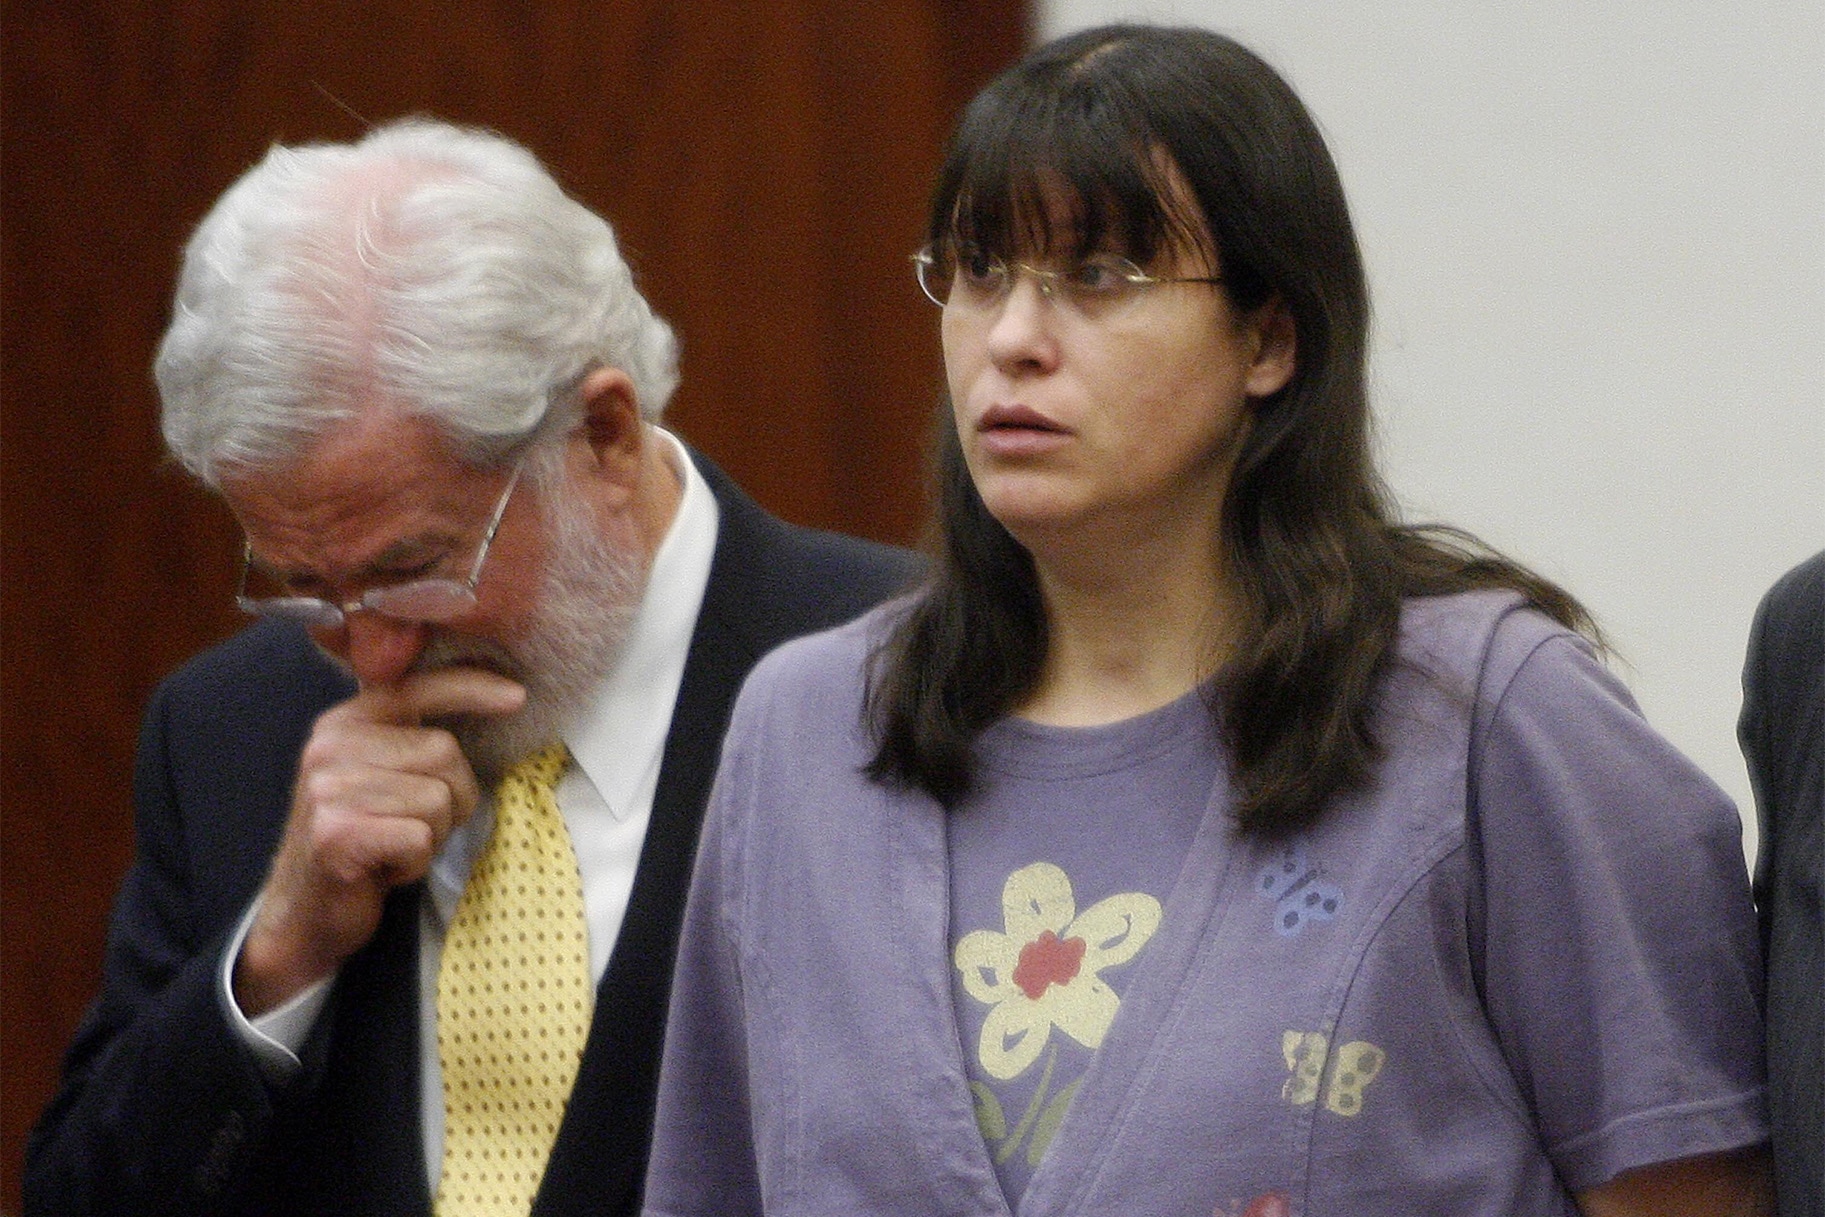 Andrea Yates (R) at her retrial